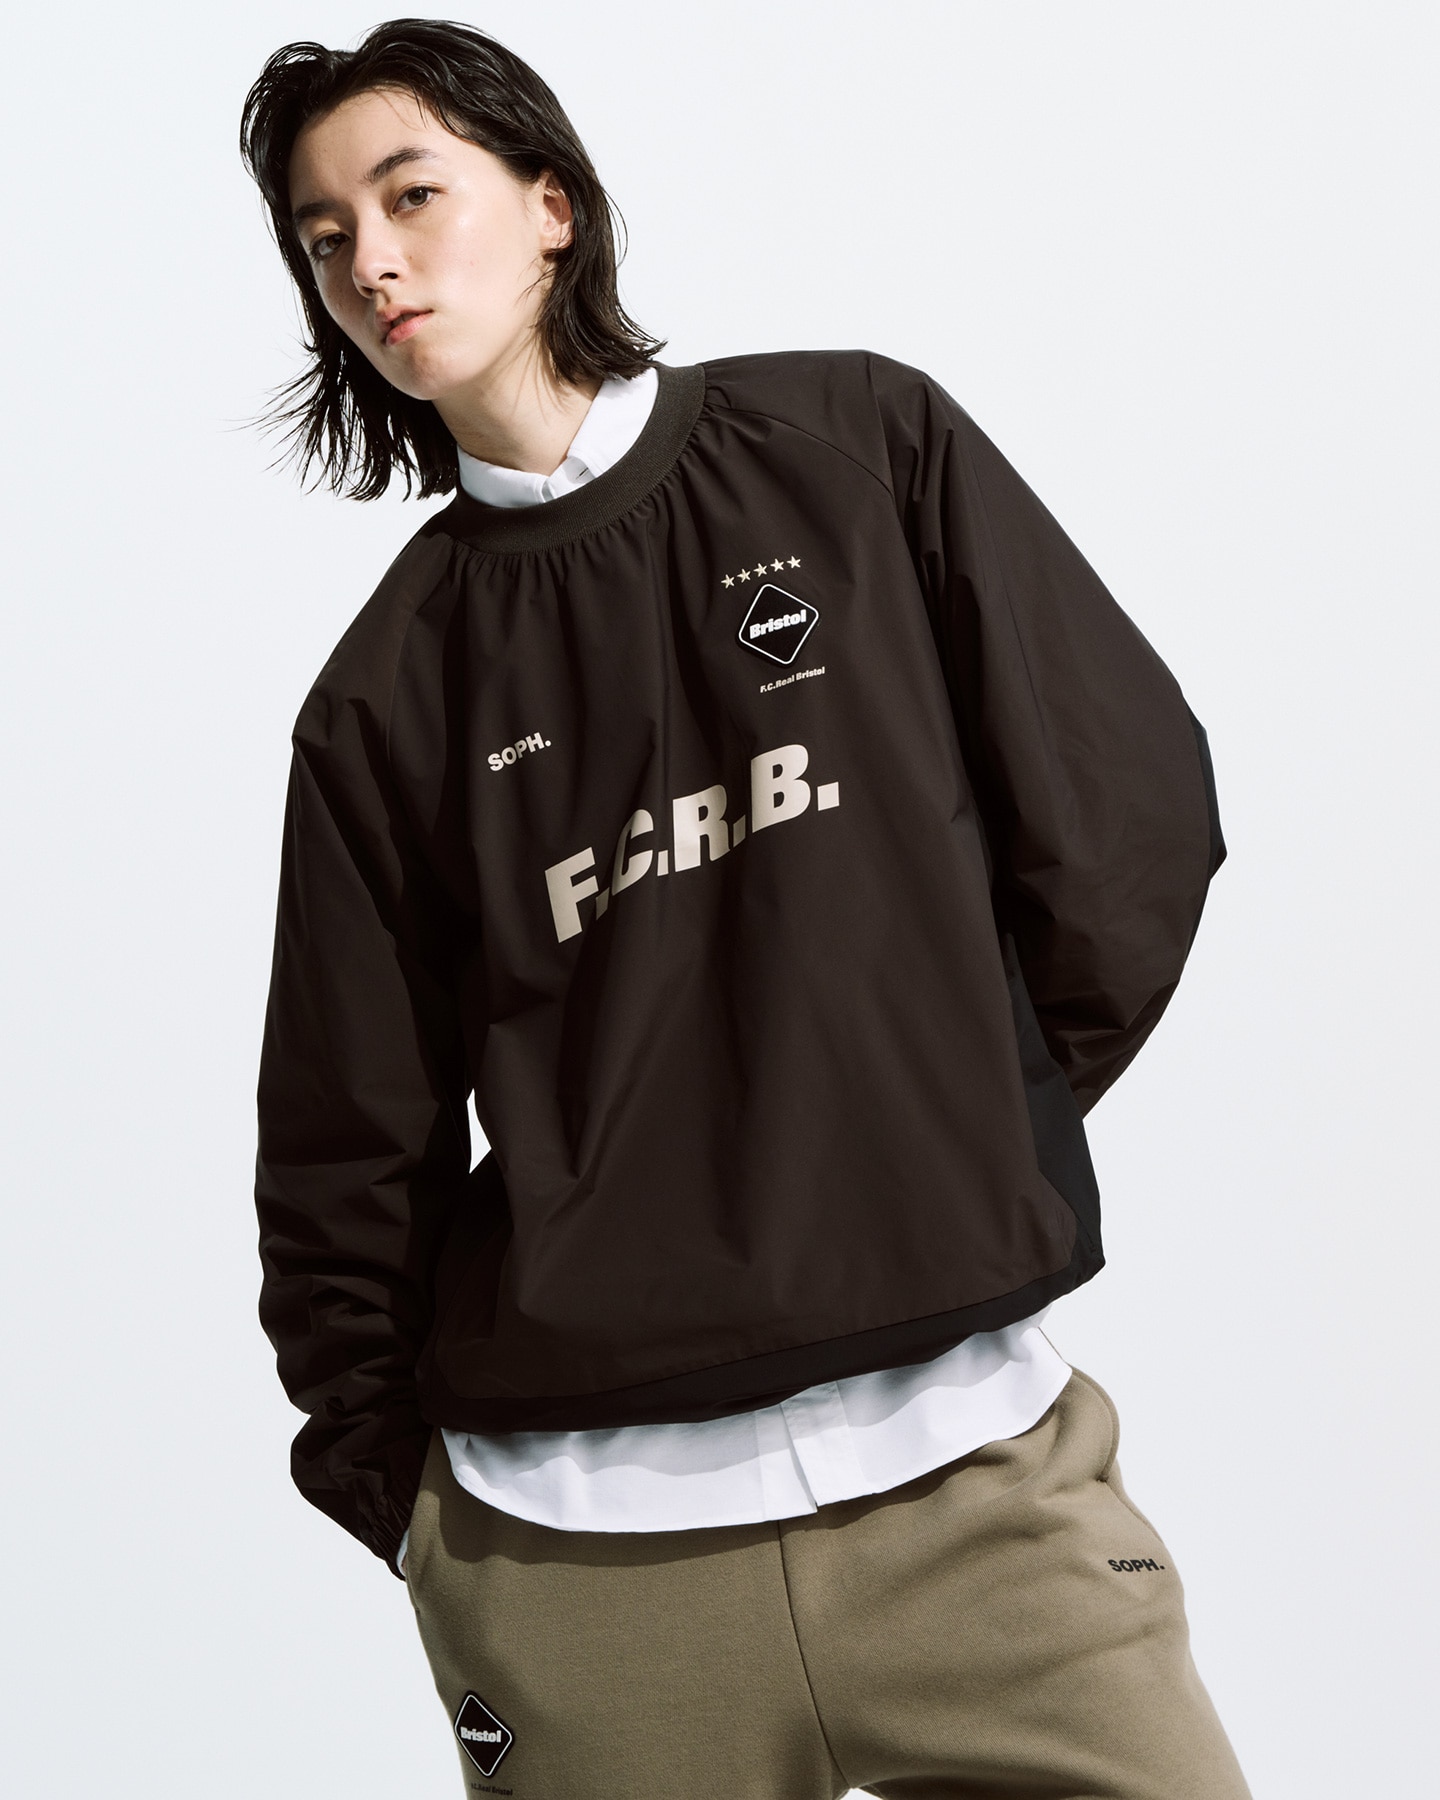 fcrb 23aw warm up piste brown M 正規品 試着のみ | www ...